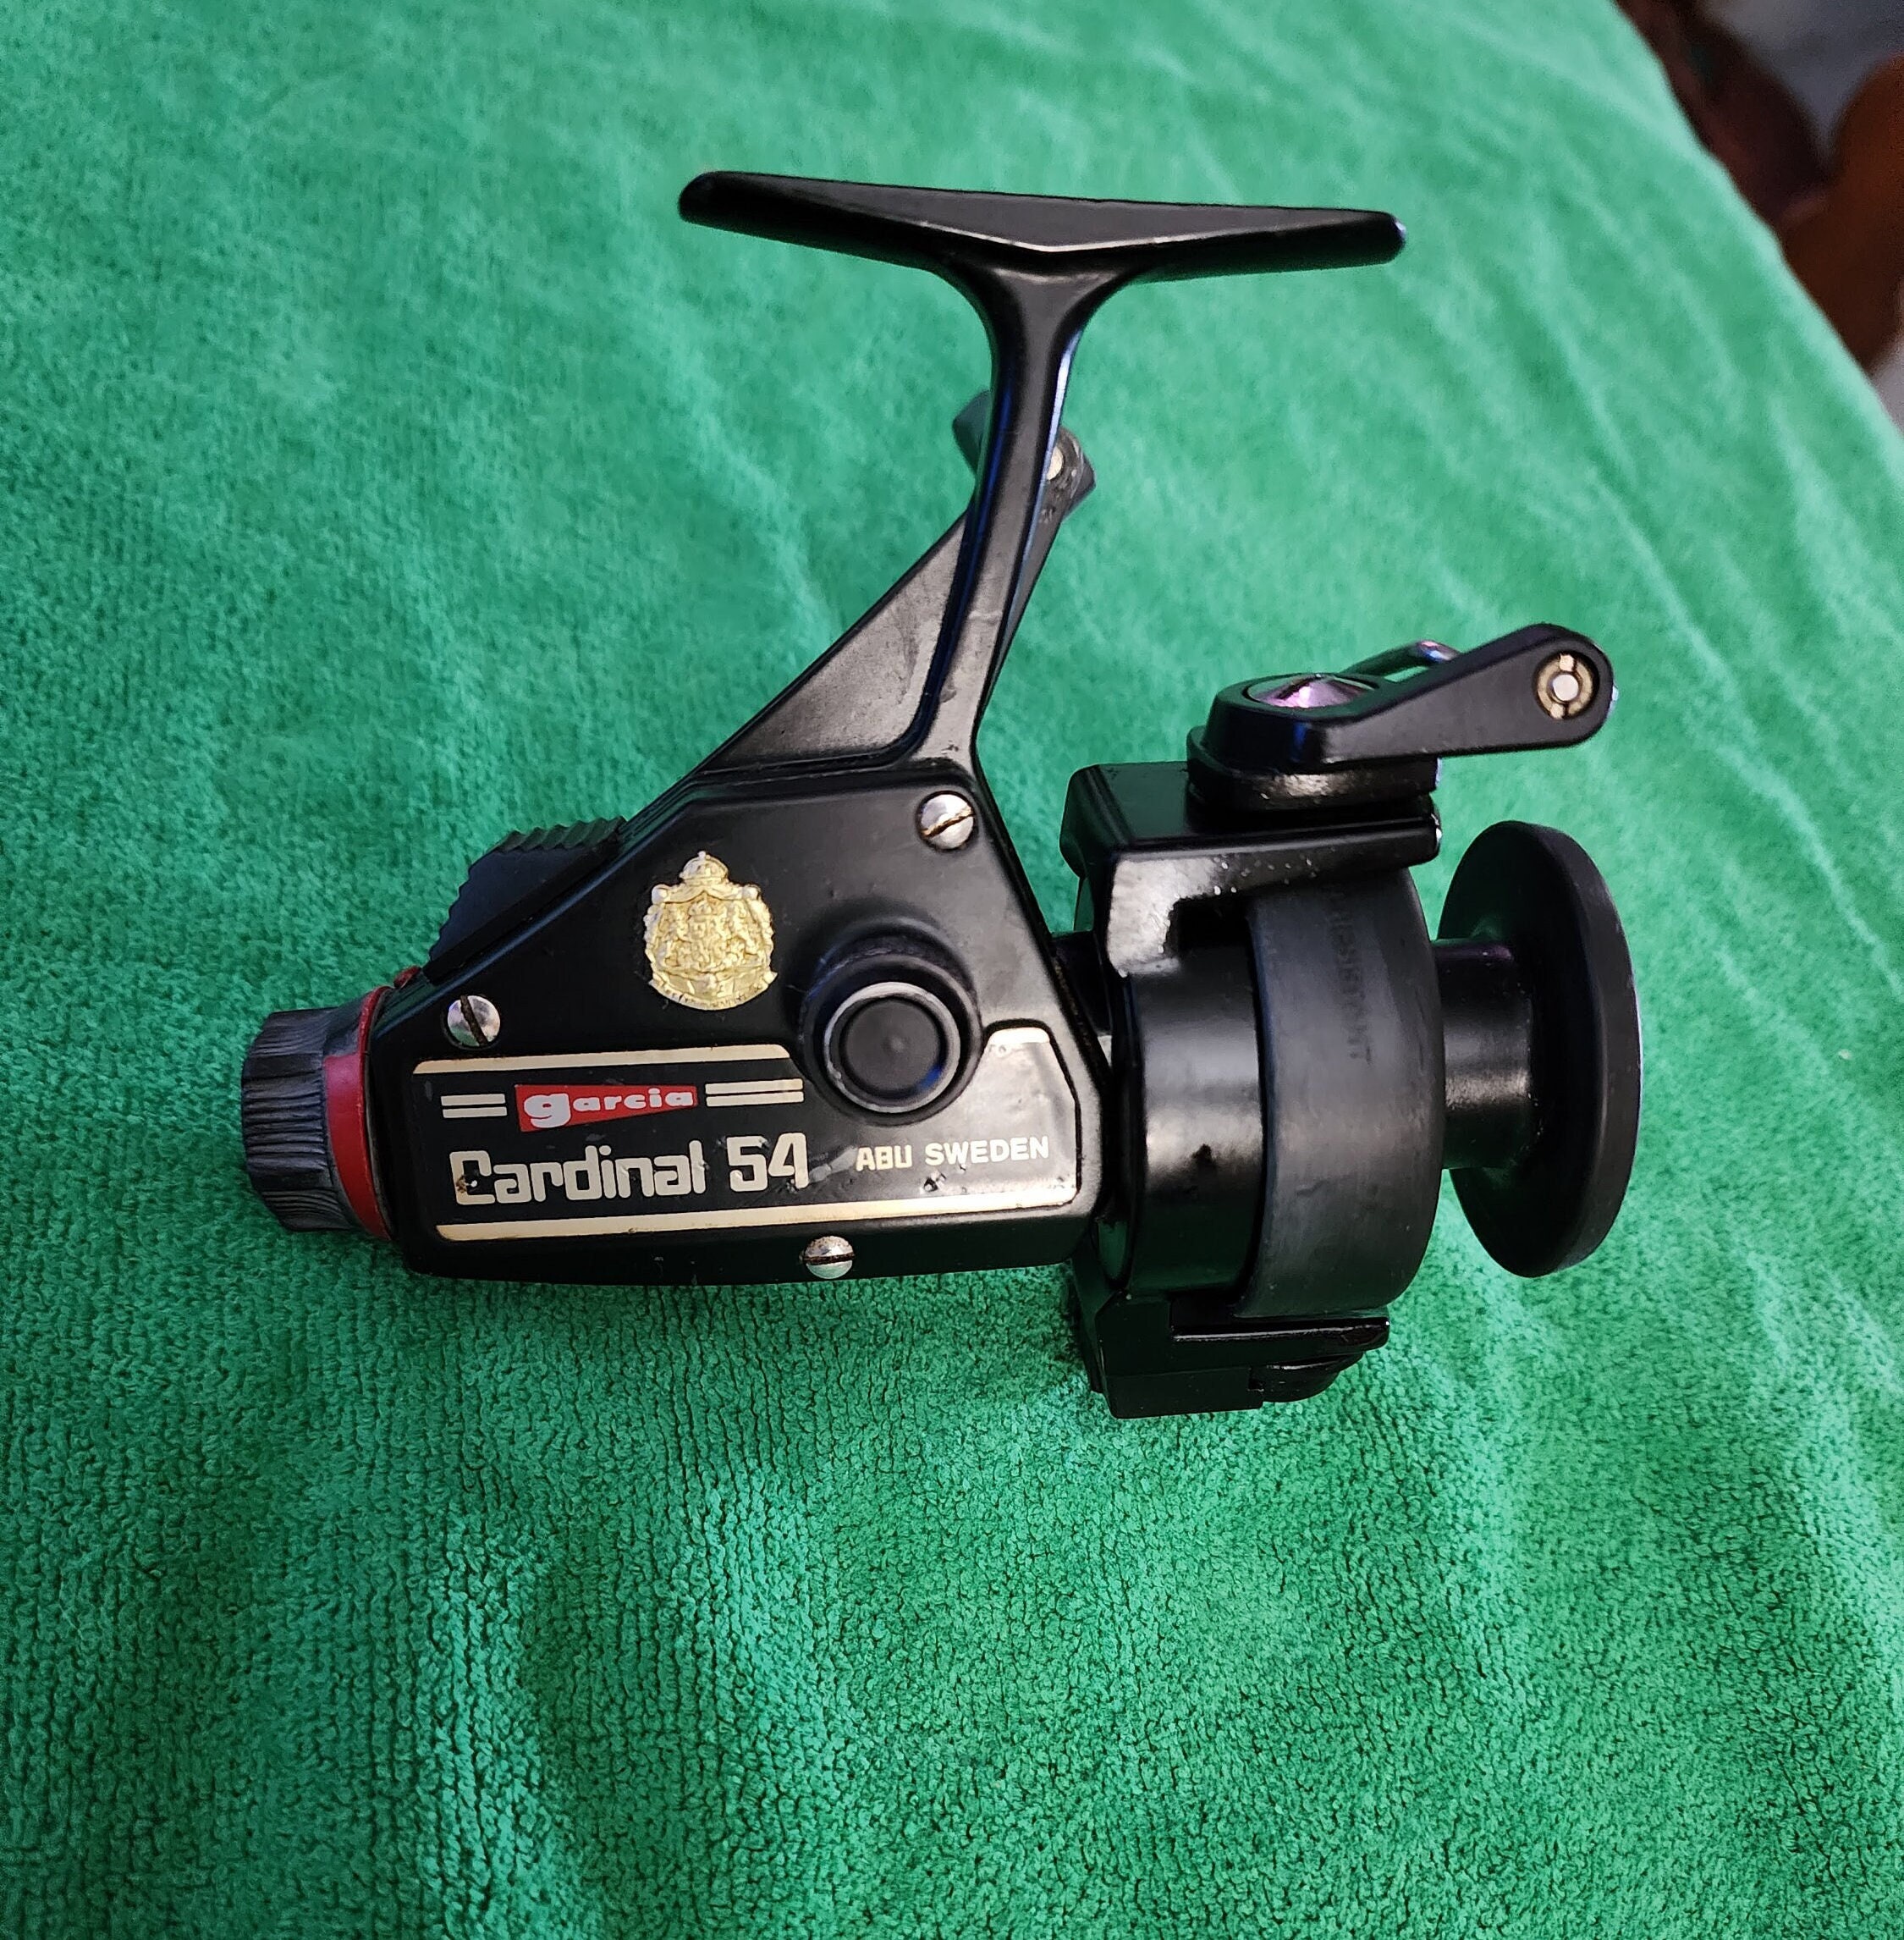 Sold at Auction: Zebco Cardinal 3 Ultra-light Spinning Reel New in Box